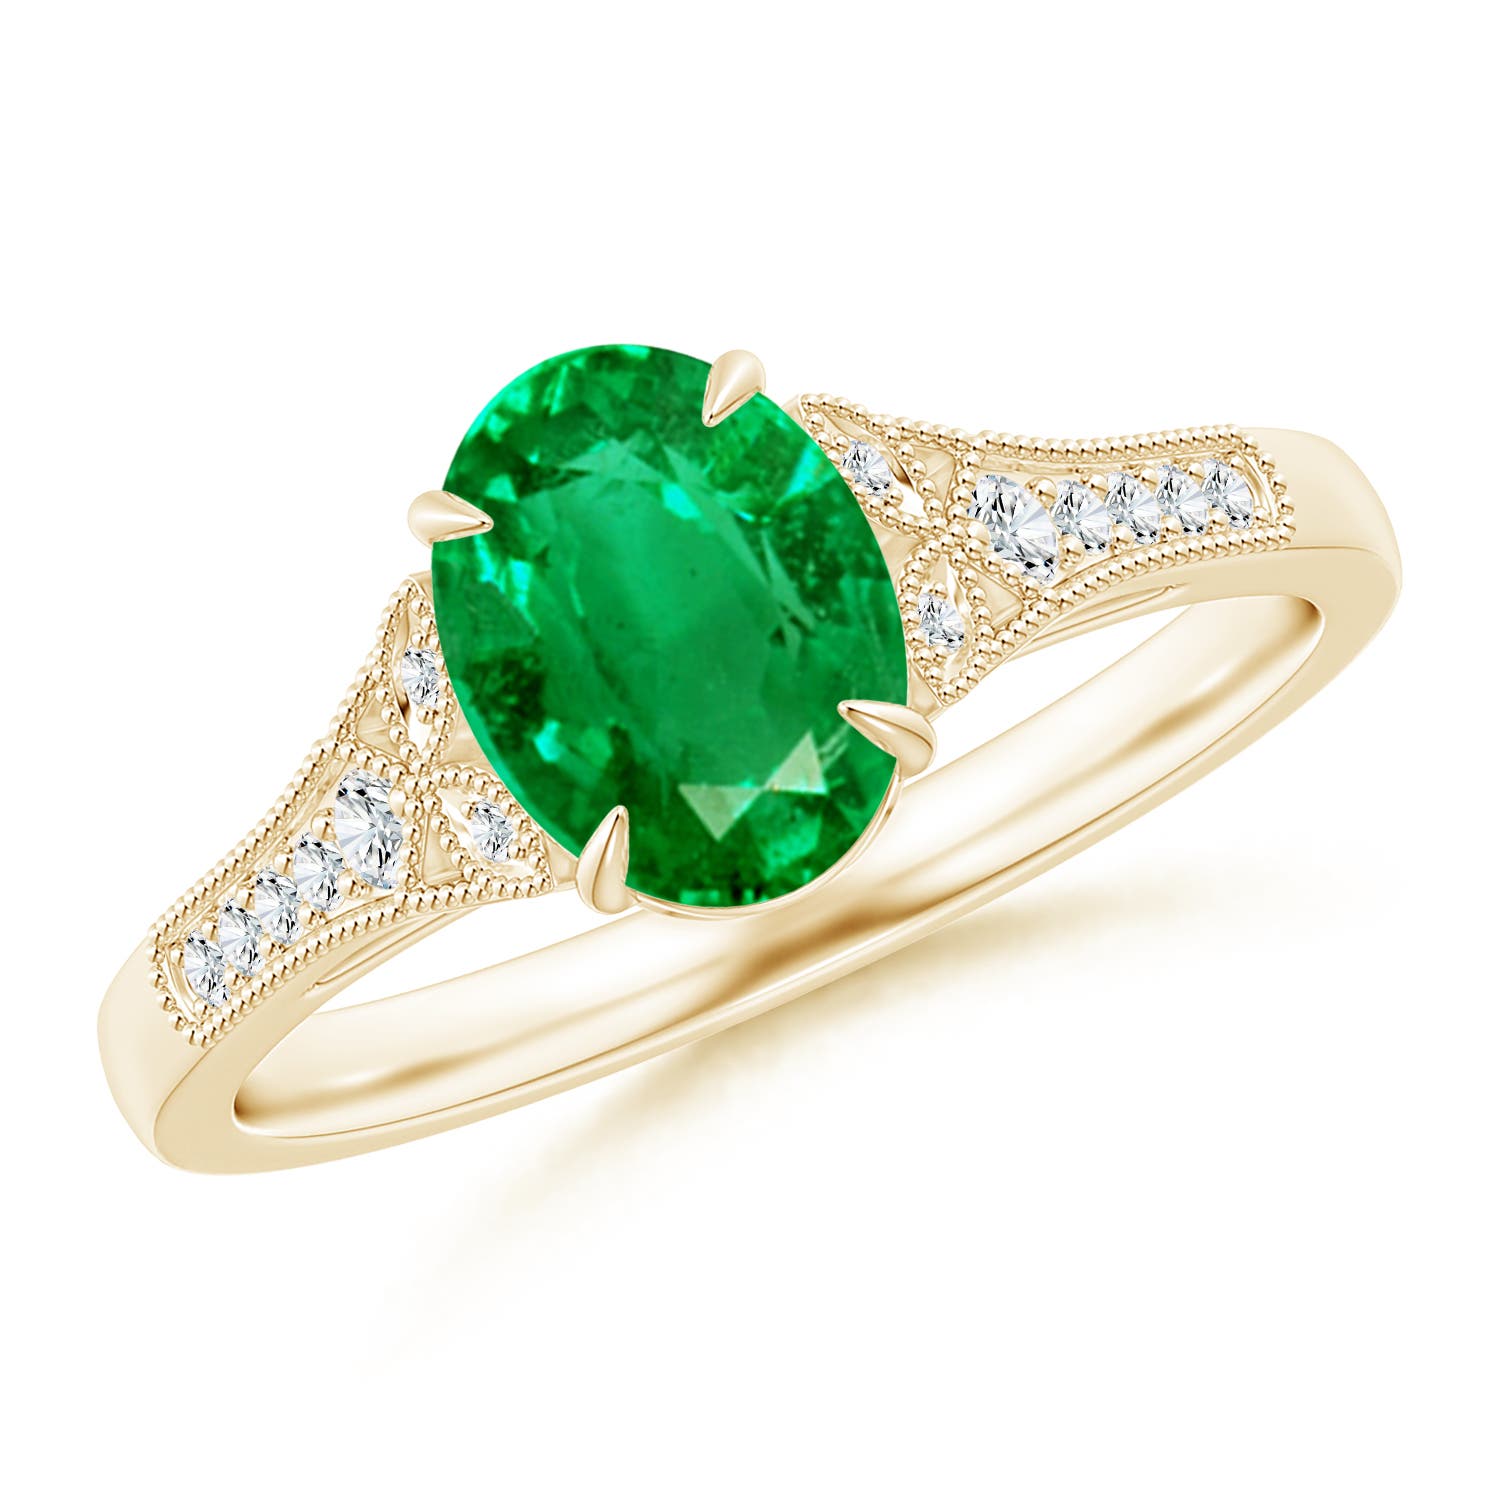 AAA - Emerald / 1.24 CT / 14 KT Yellow Gold